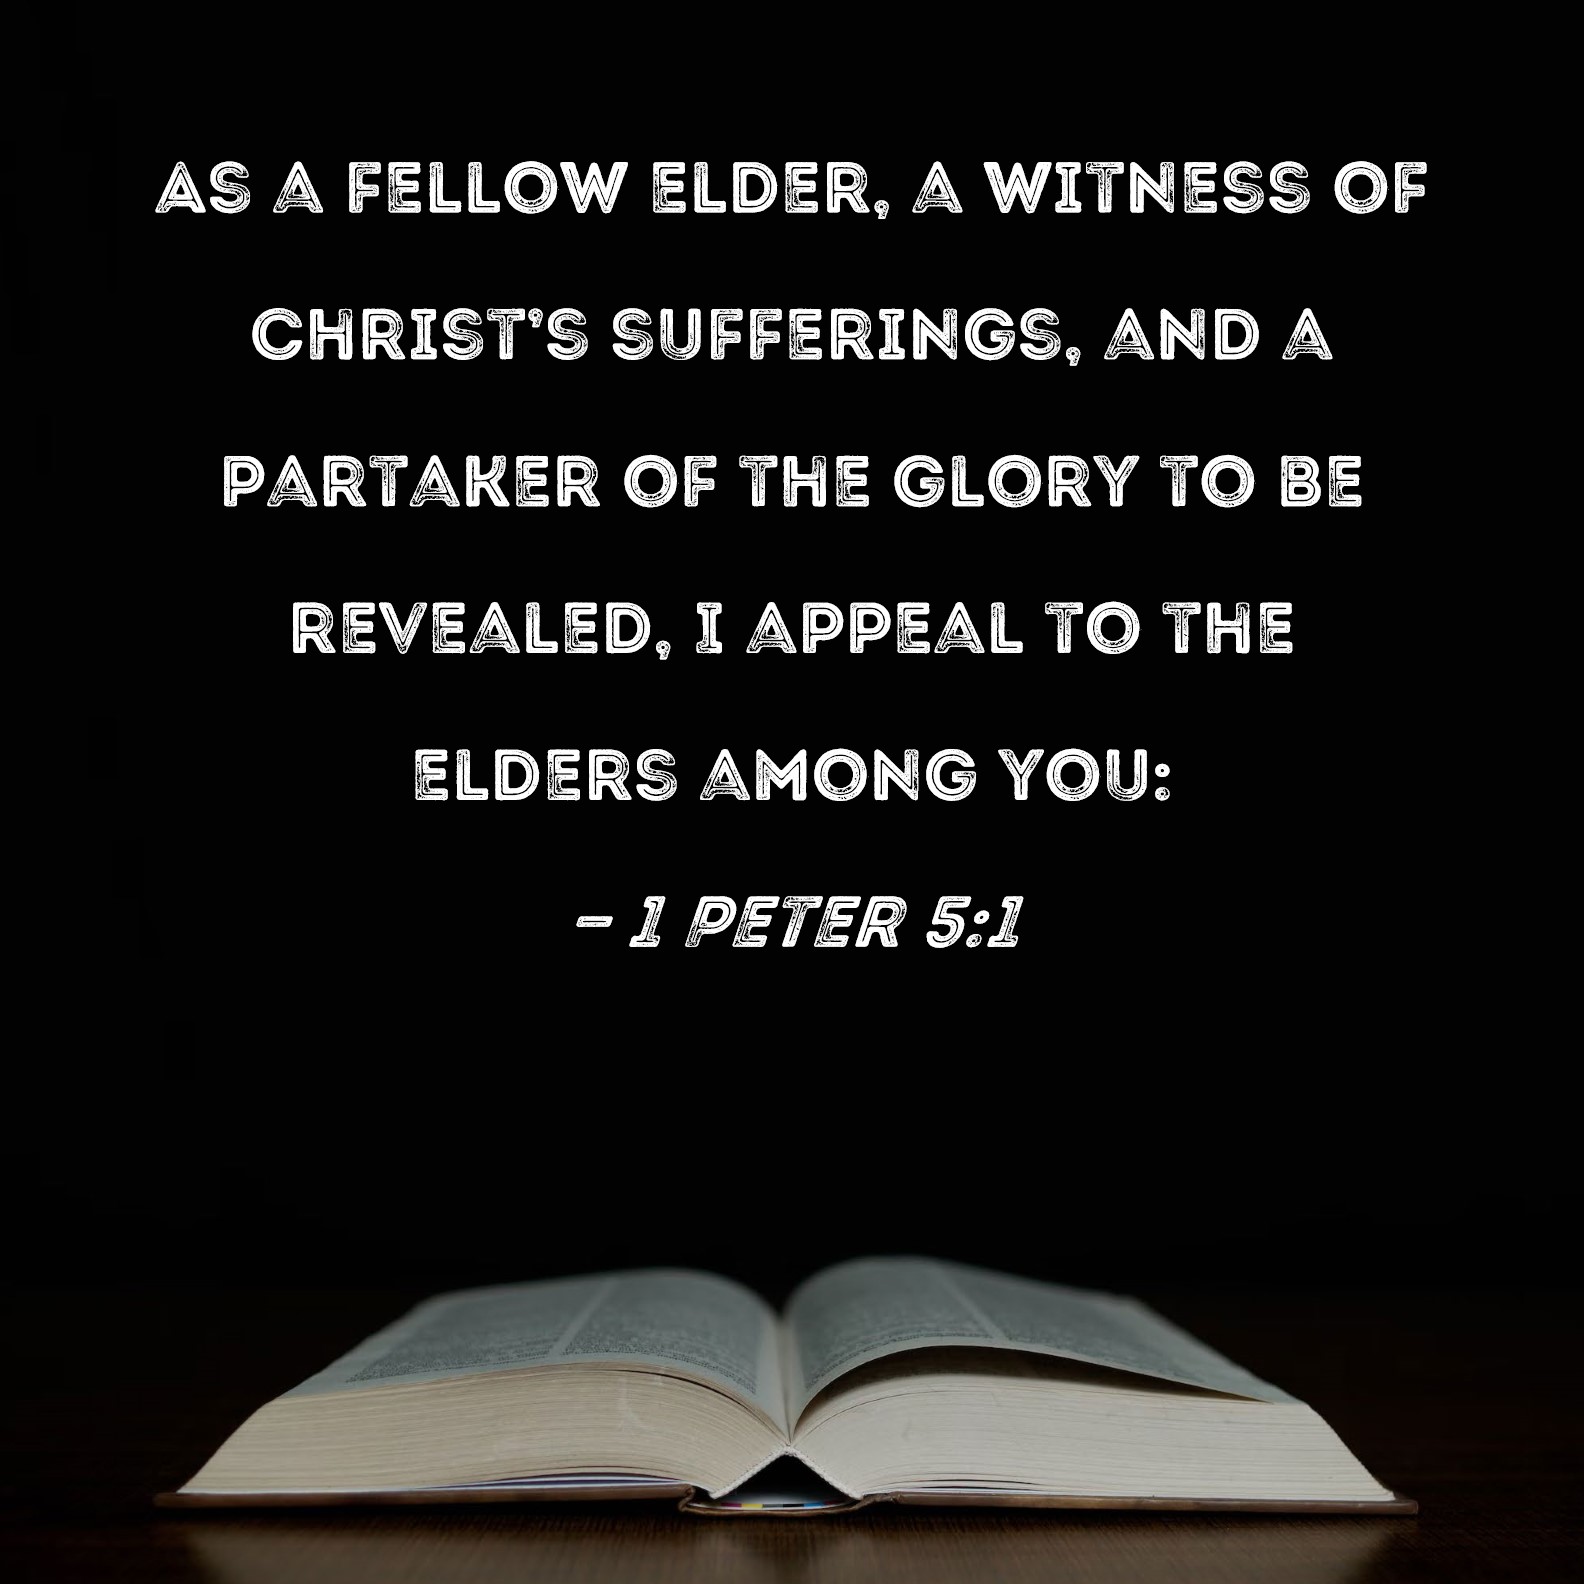 1-peter-5-1-as-a-fellow-elder-a-witness-of-christ-s-sufferings-and-a